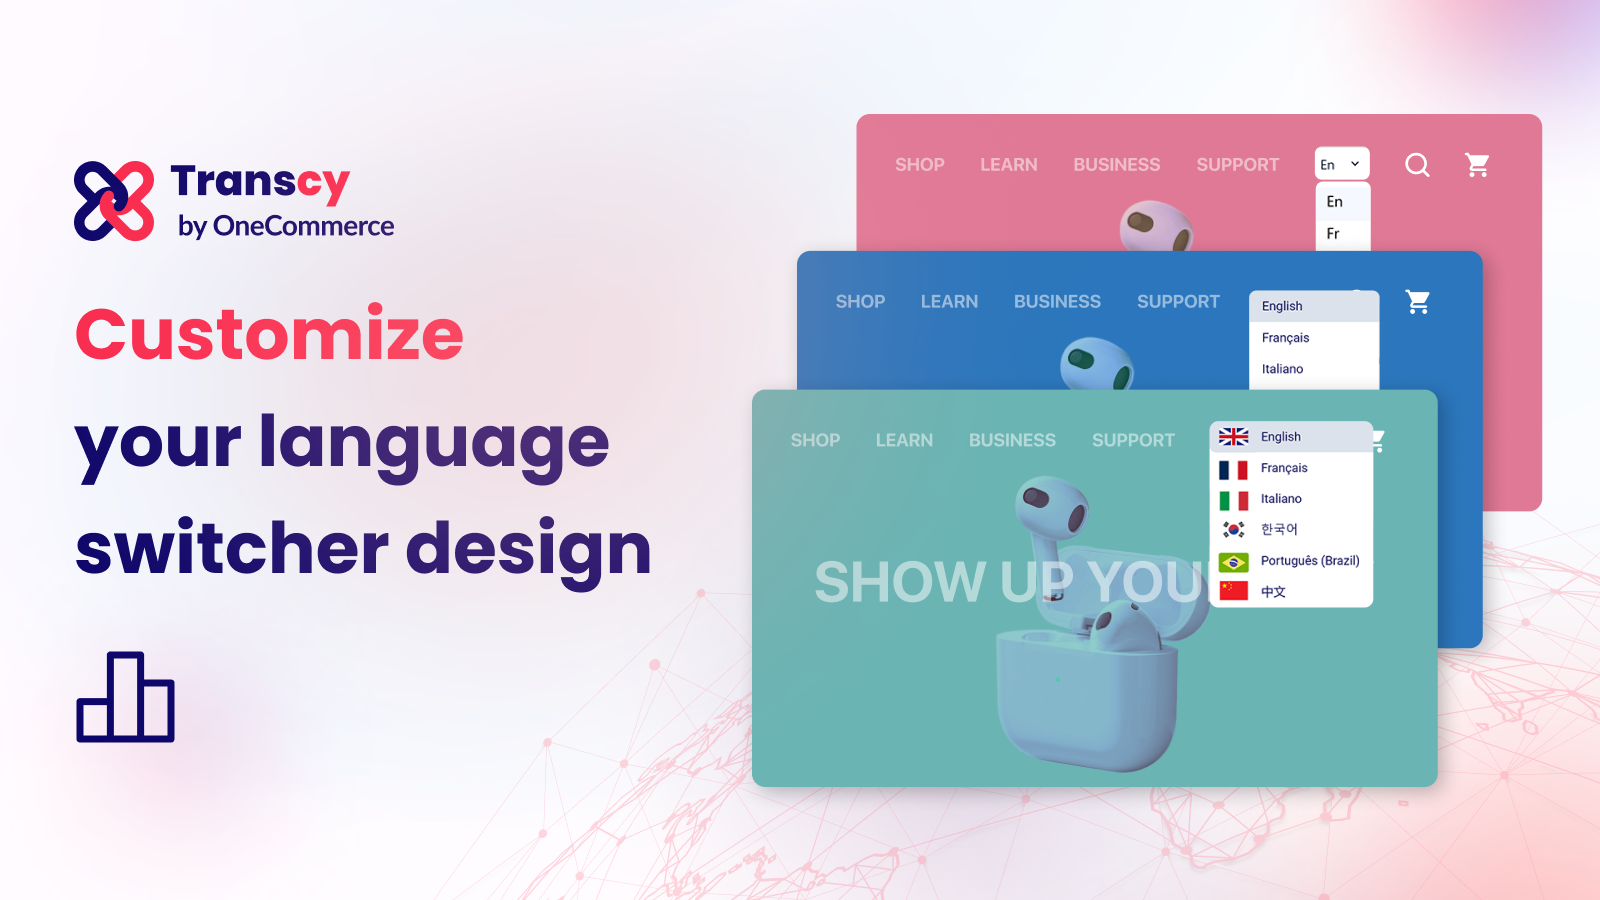 Customize your language and currency switcher design to match your site and stand out